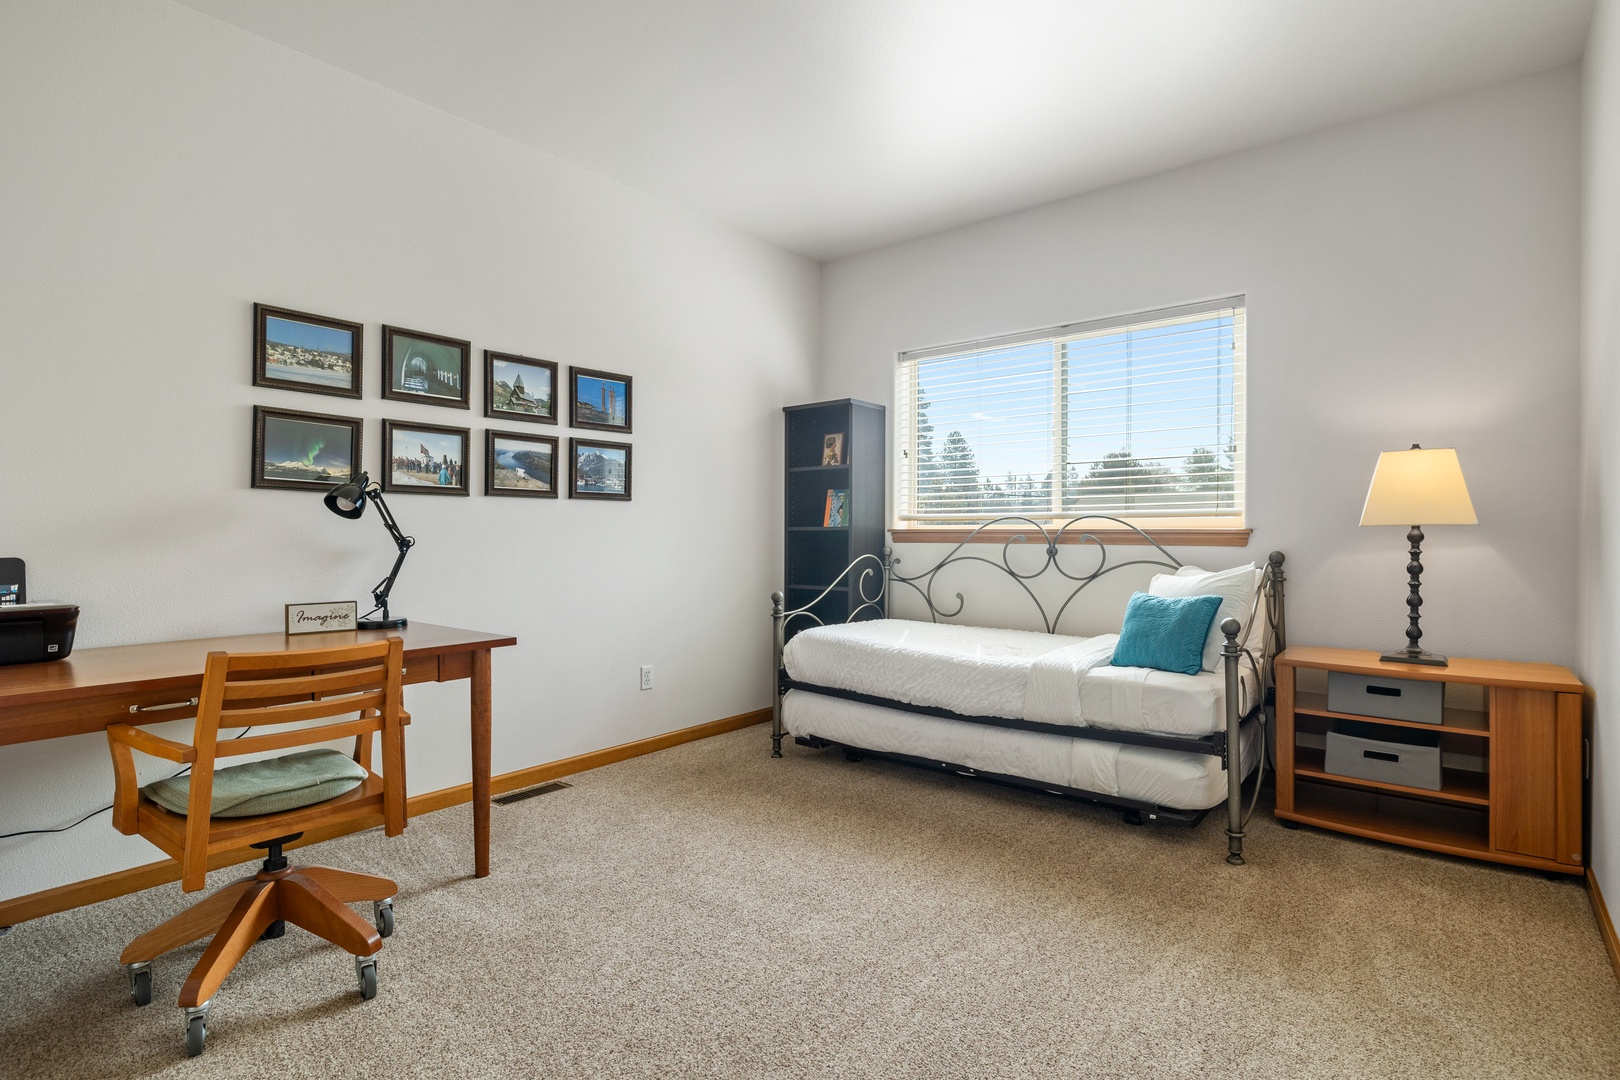 This 2nd floor bedroom offers a twin bed, twin trundle, and desk workspace